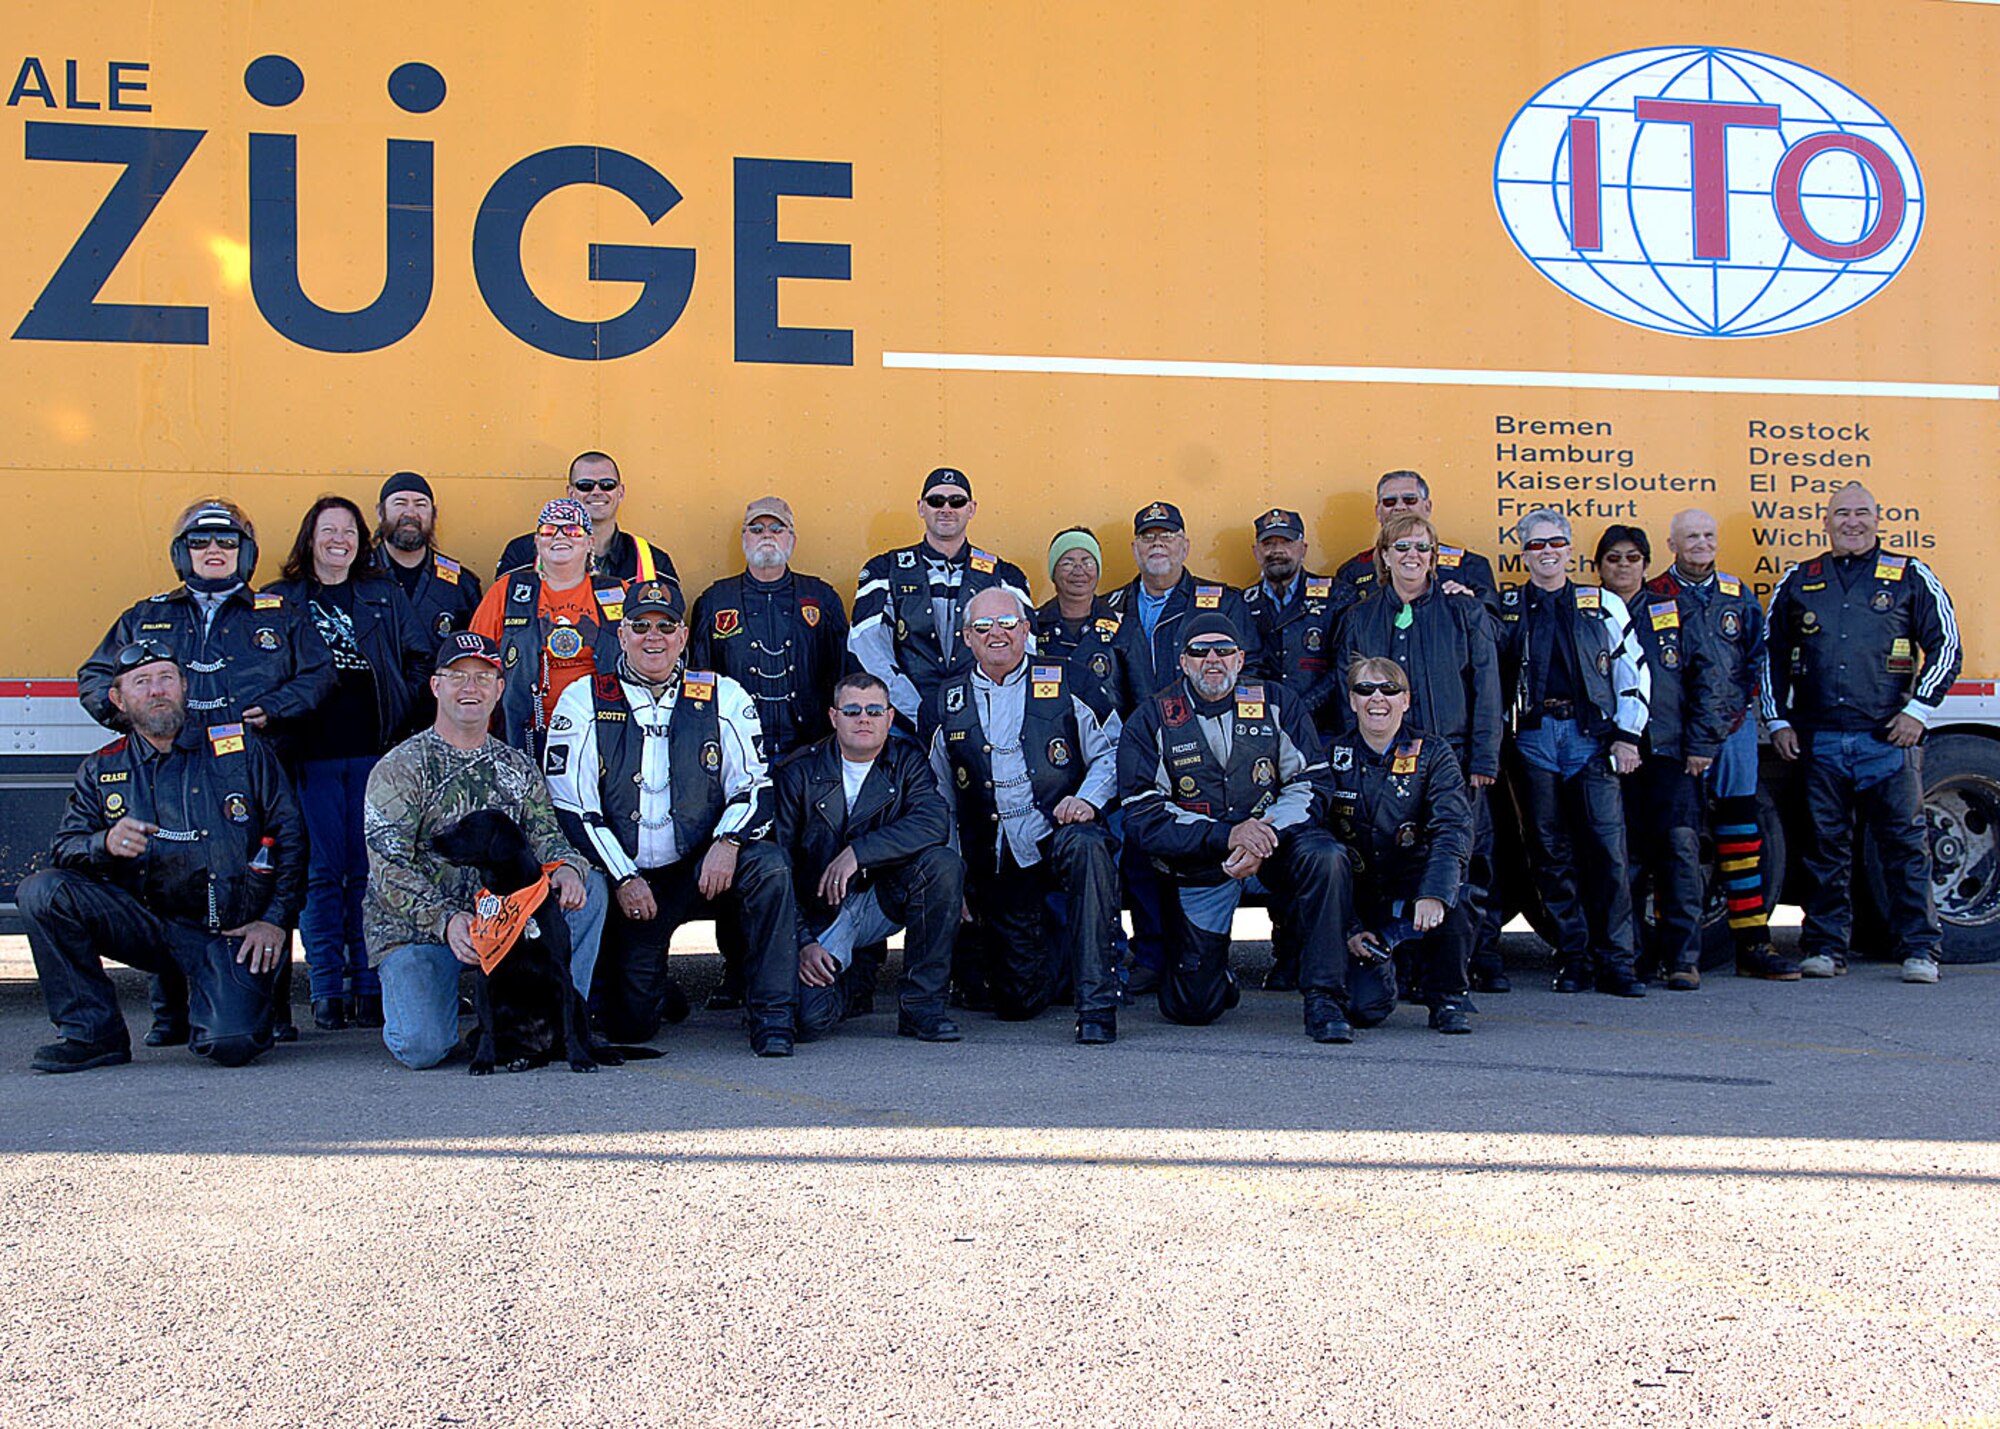 Members of the American Legion Riders pose for a group photo October 7, in Alamogordo, N.M.  (U.S. Air Force photo by Airman 1st Class John D. Strong II)